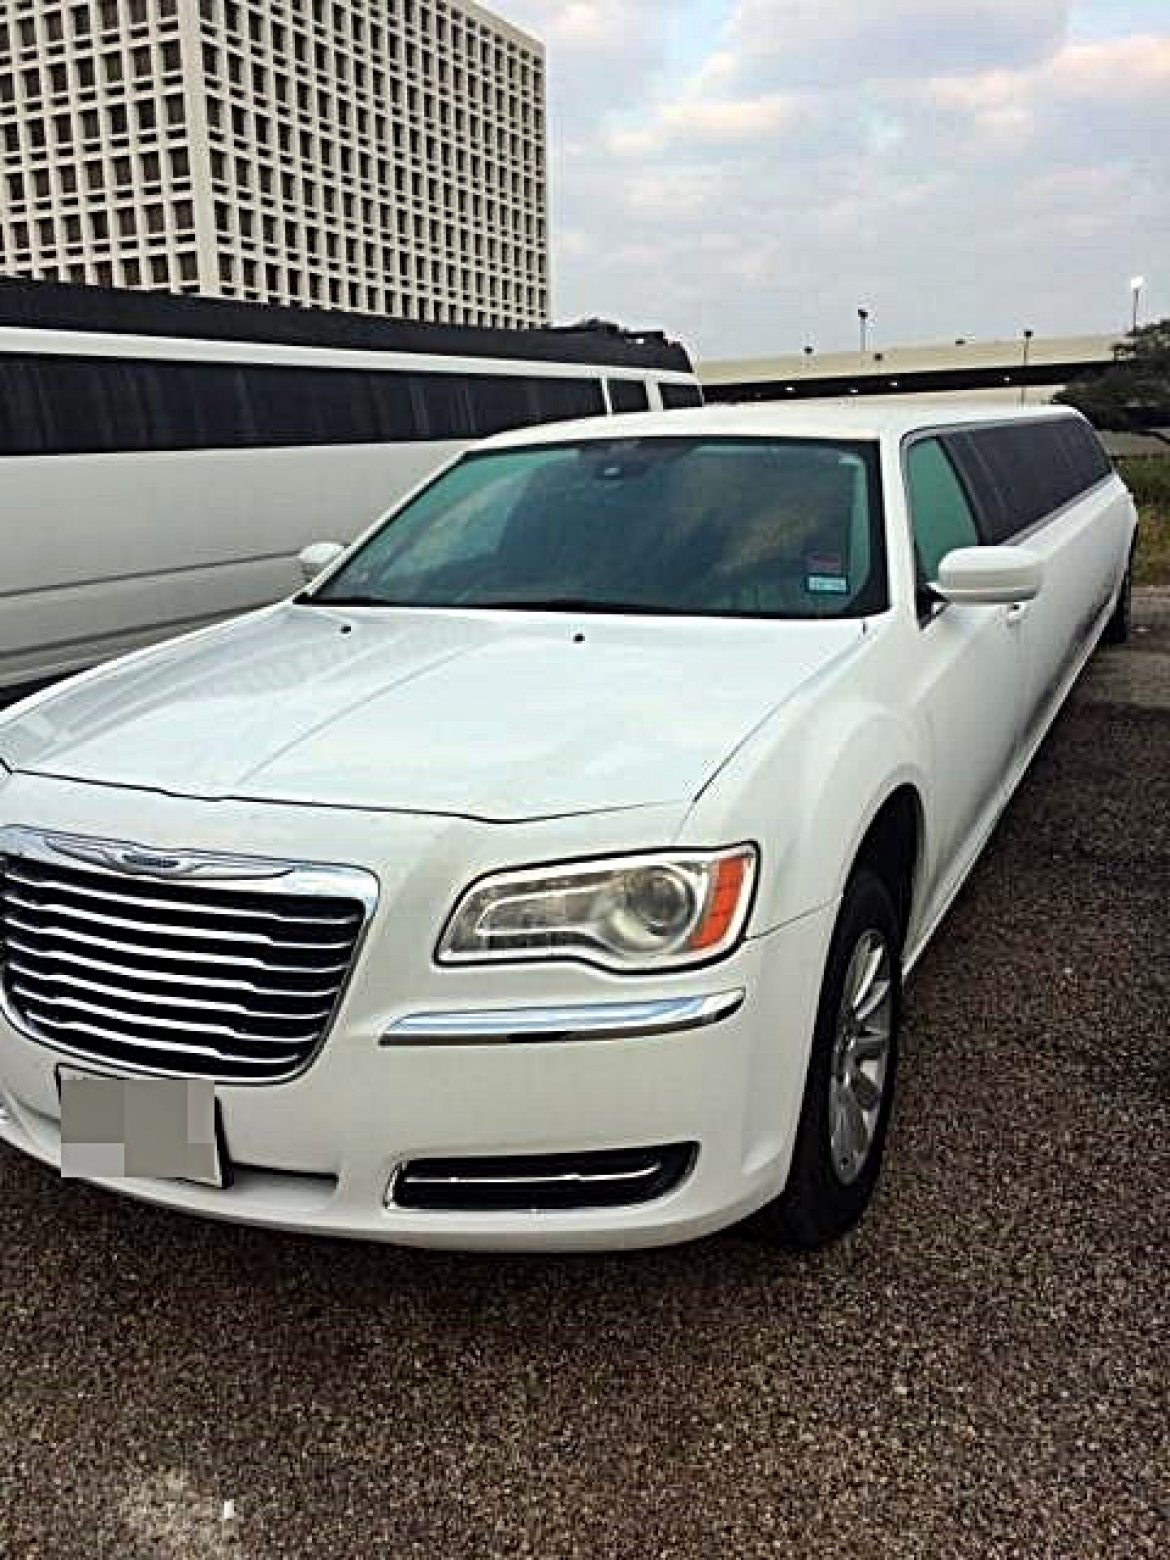 Limousine for sale: 2014 Chrysler 300 160&quot; by Moonlight